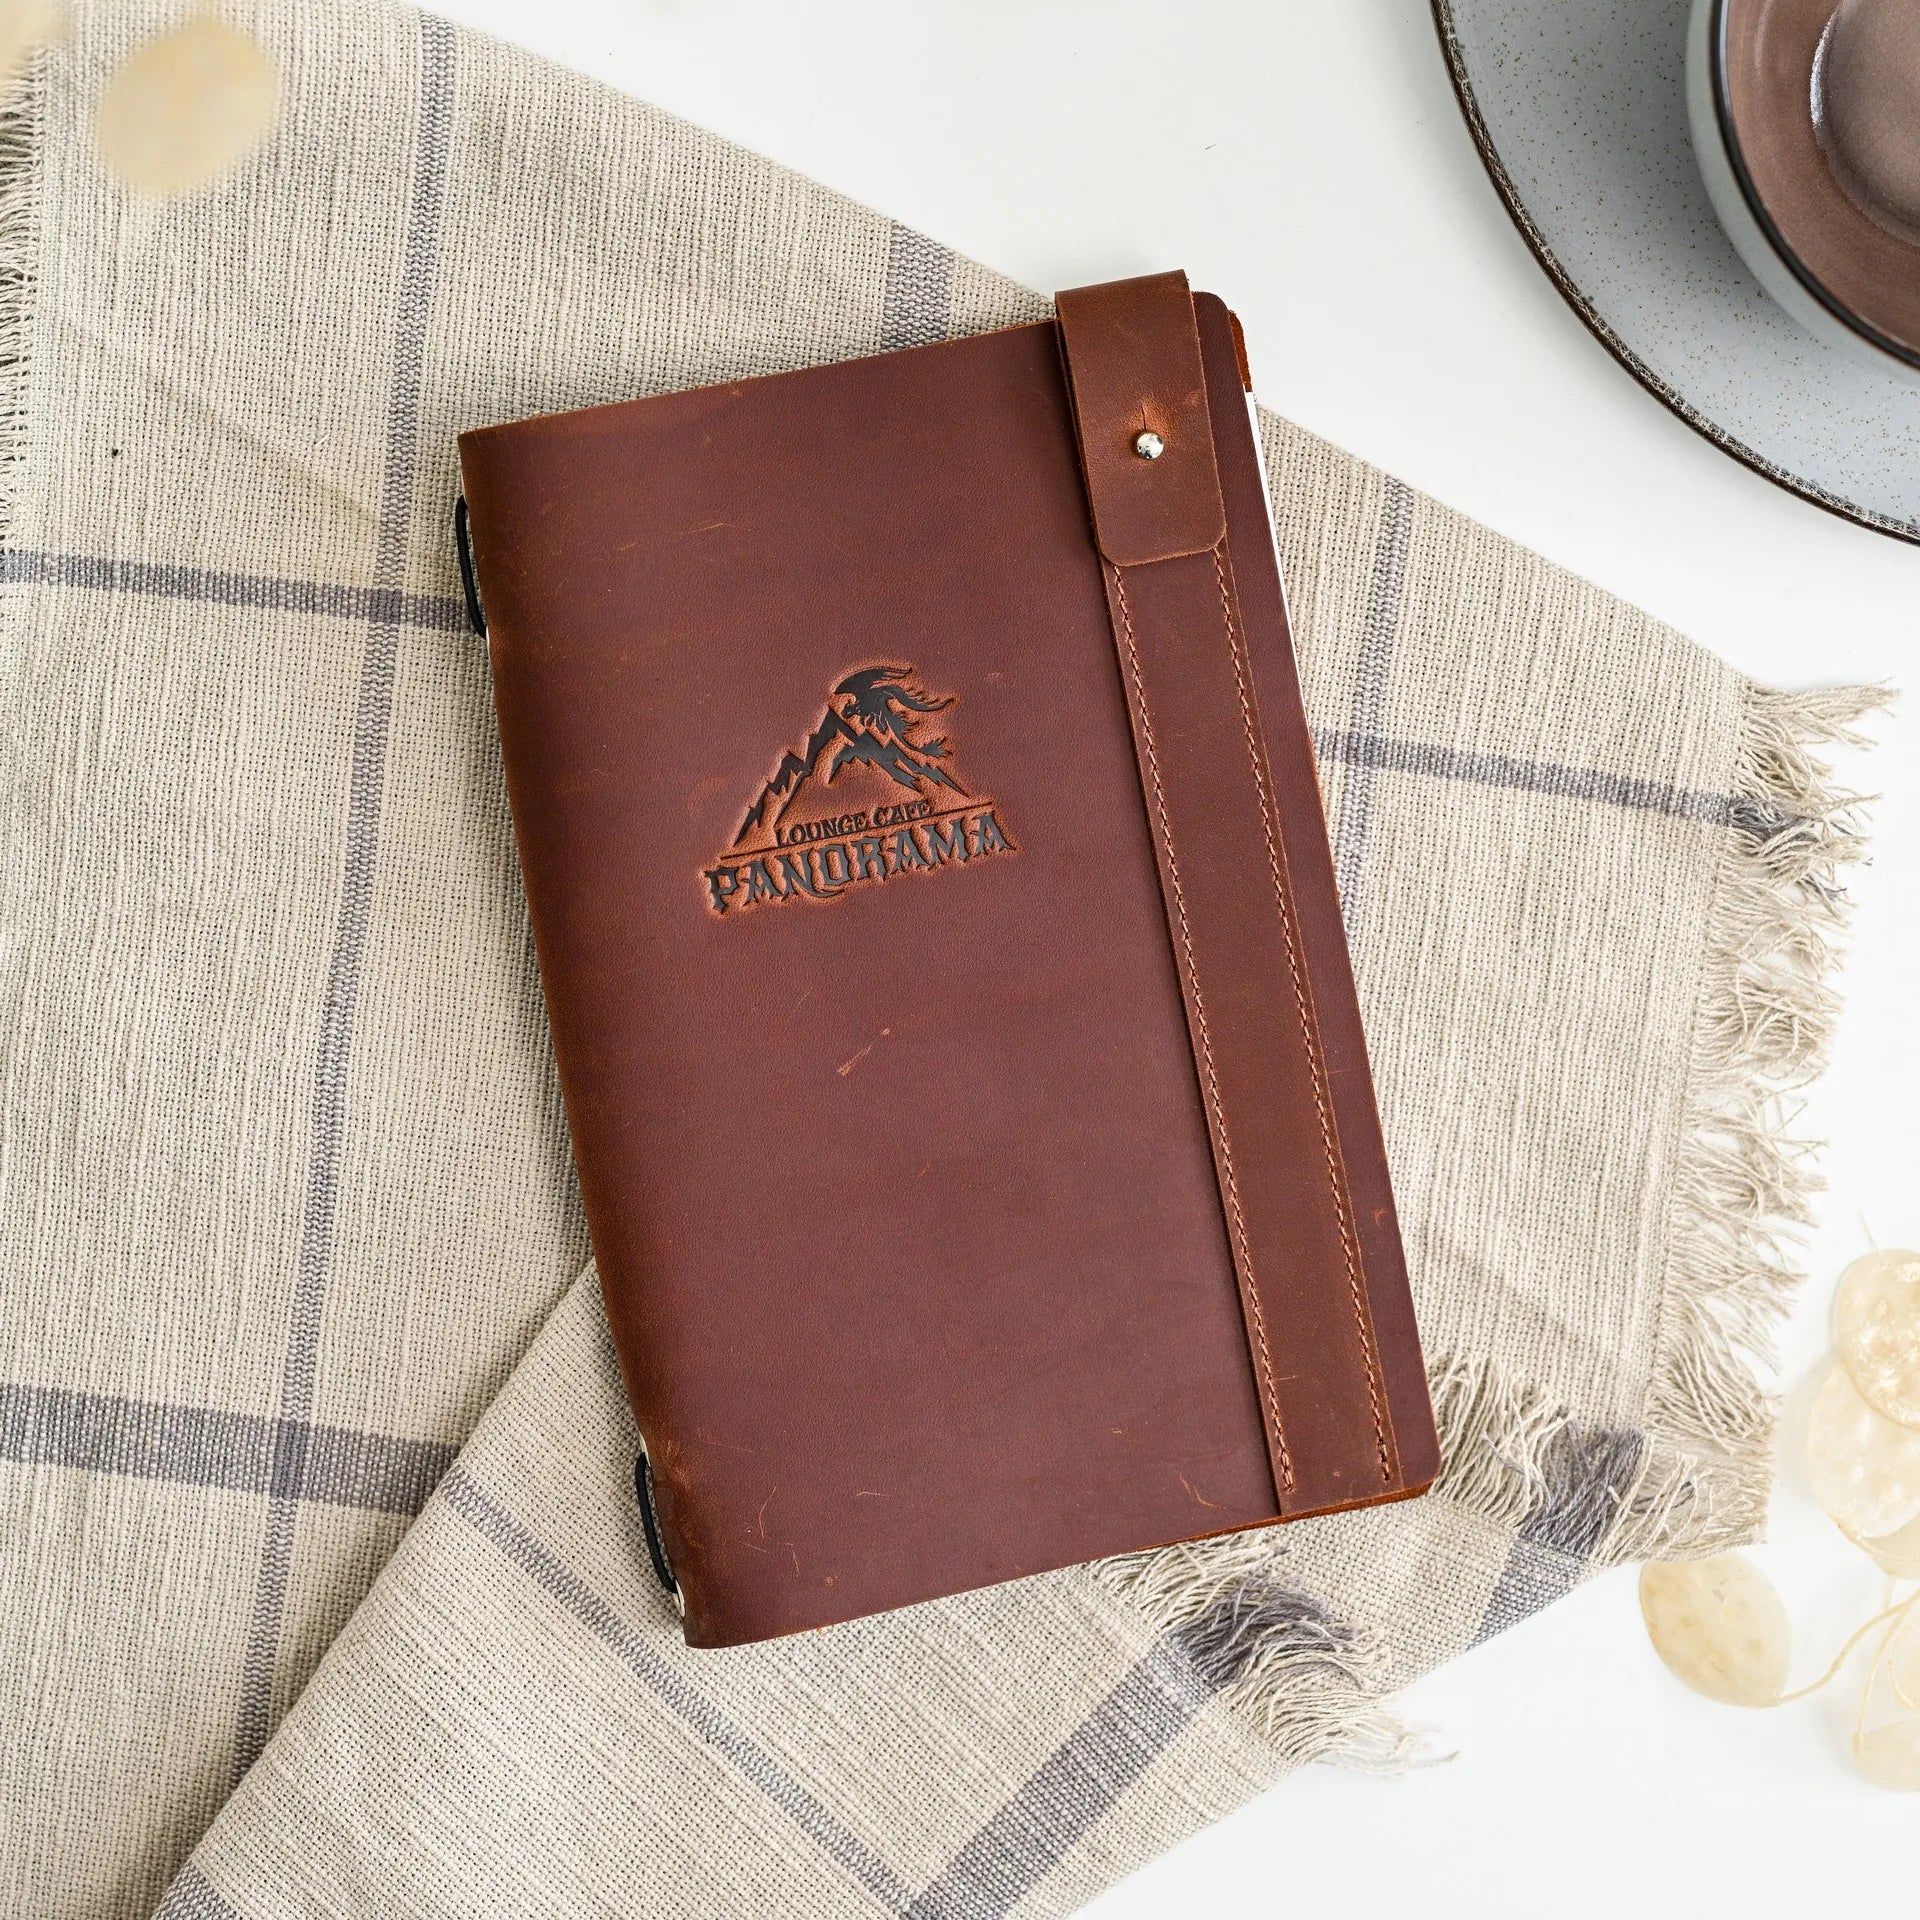 Our handcrafted soft leather menu cover adds a touch of luxury to your restaurant's presentation.